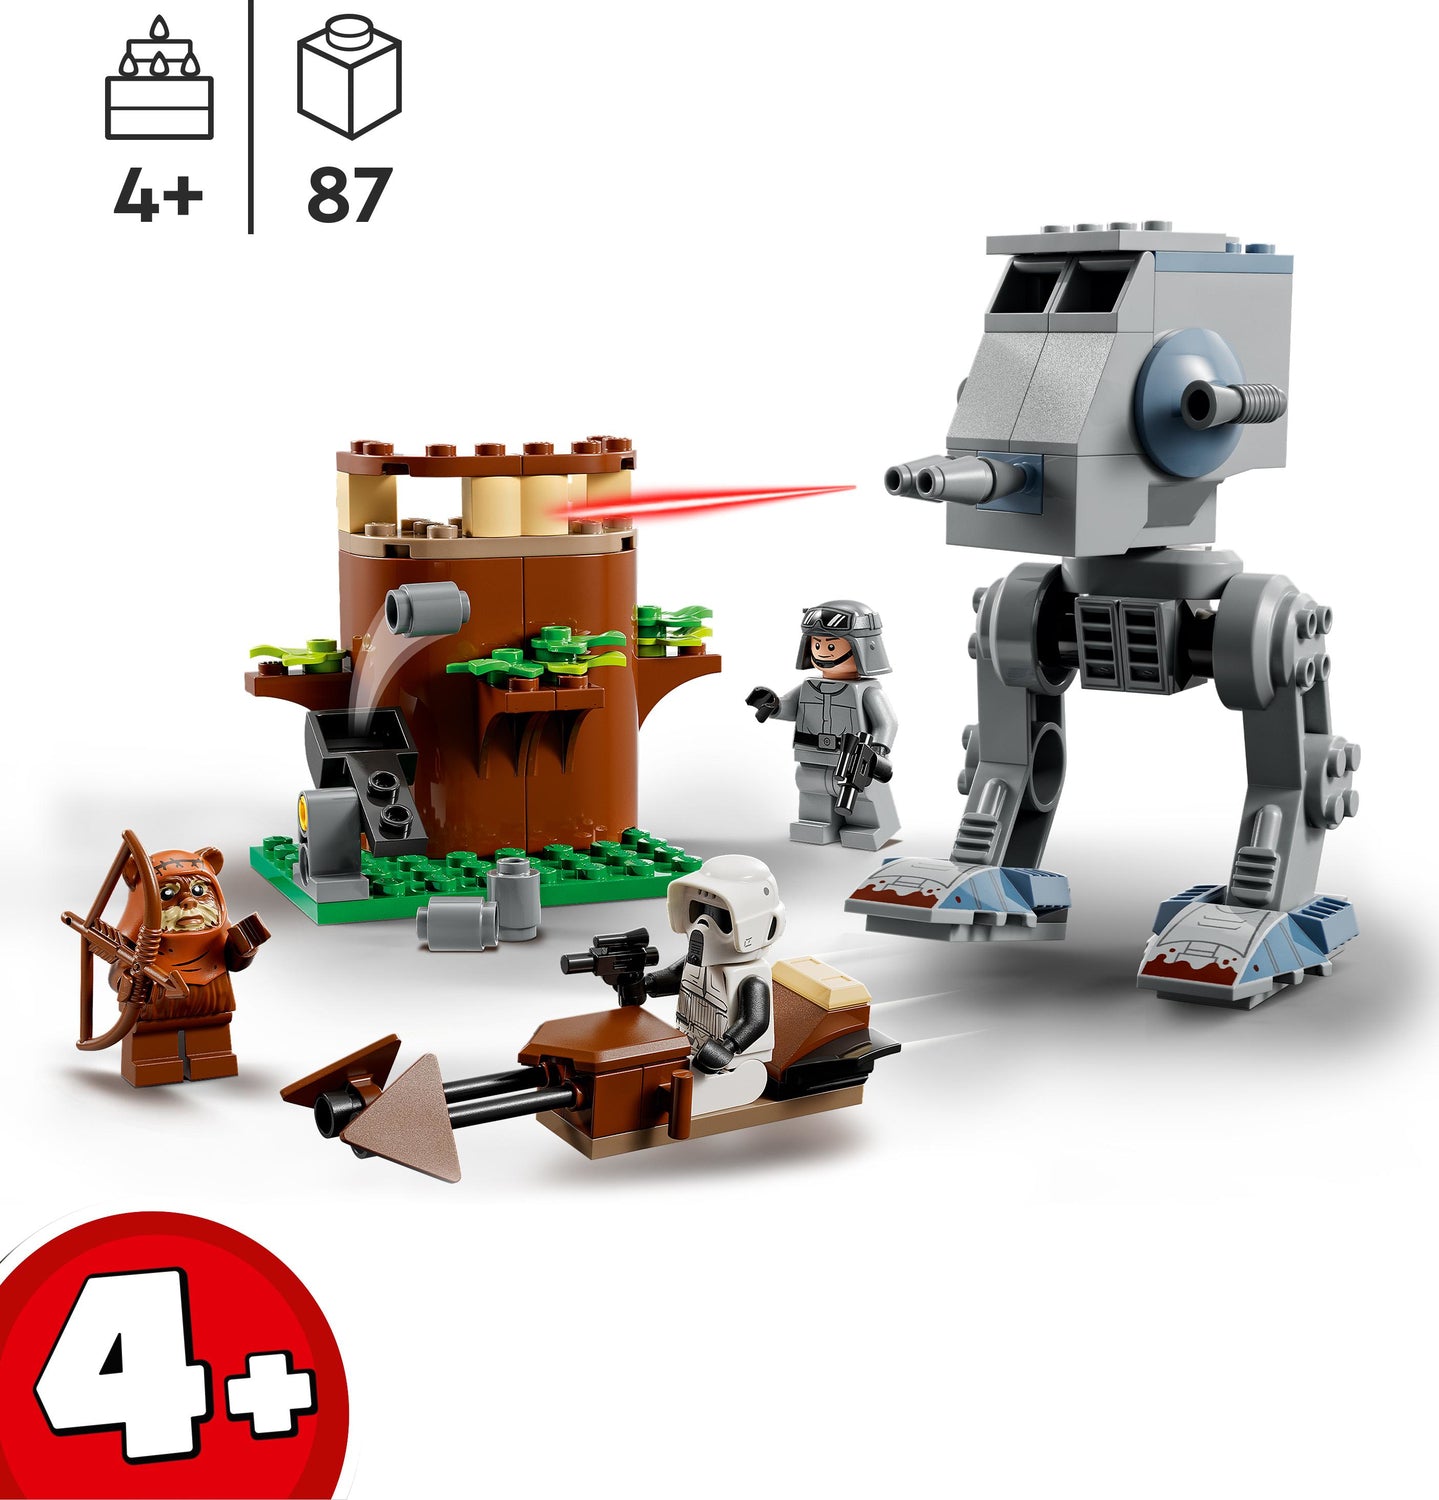 LEGO® Star Wars AT-ST Buildable Toy